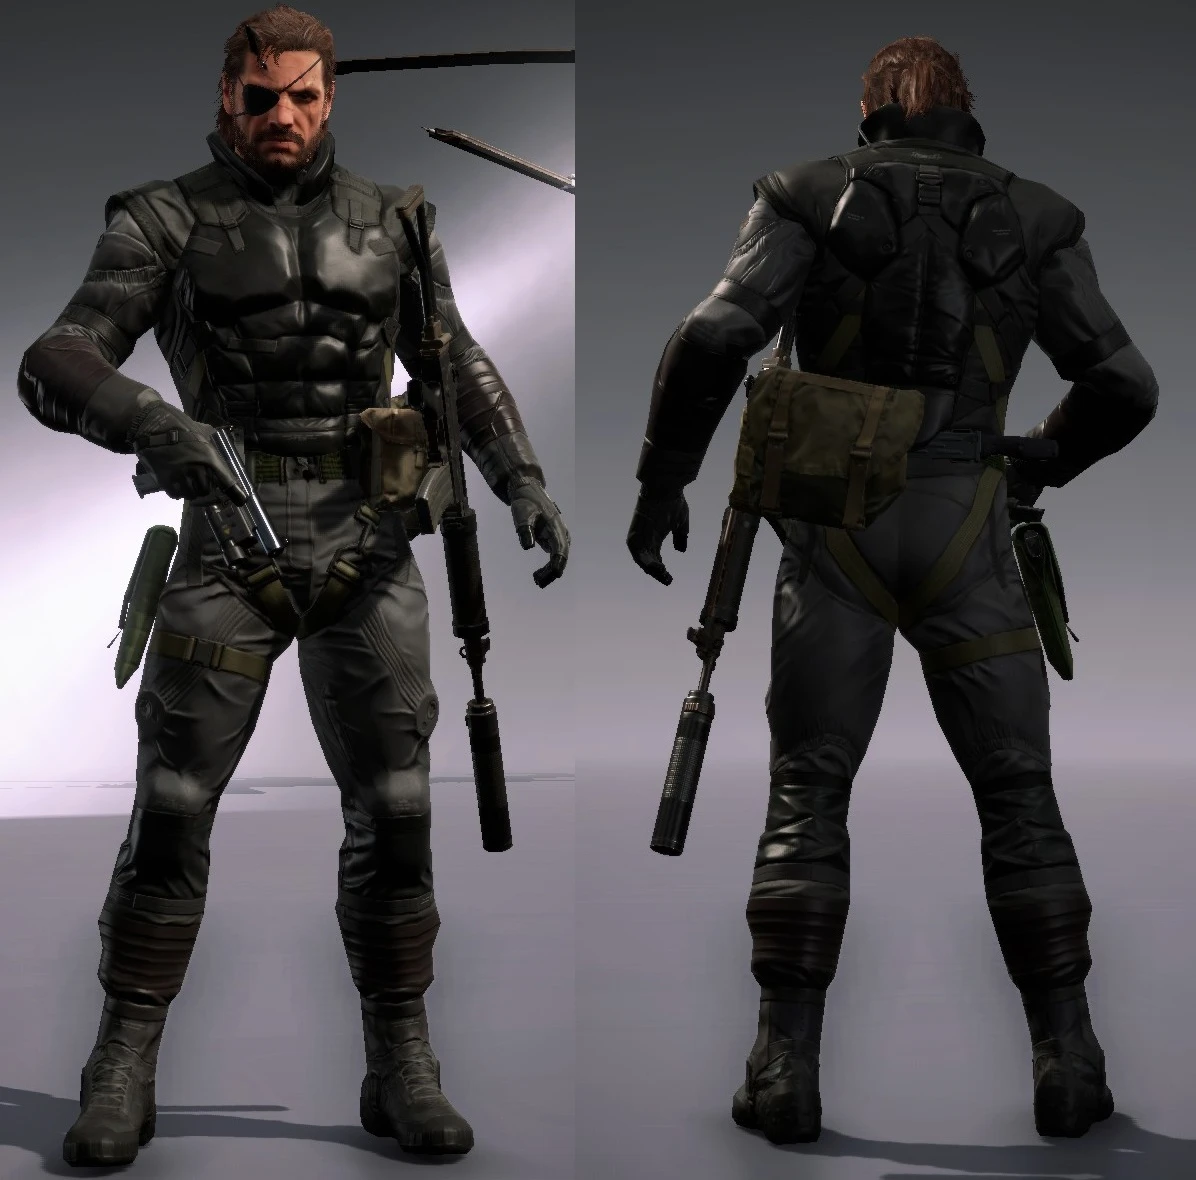 solid snake mod combination at metal gear solid v the phantom pain nexus mo...